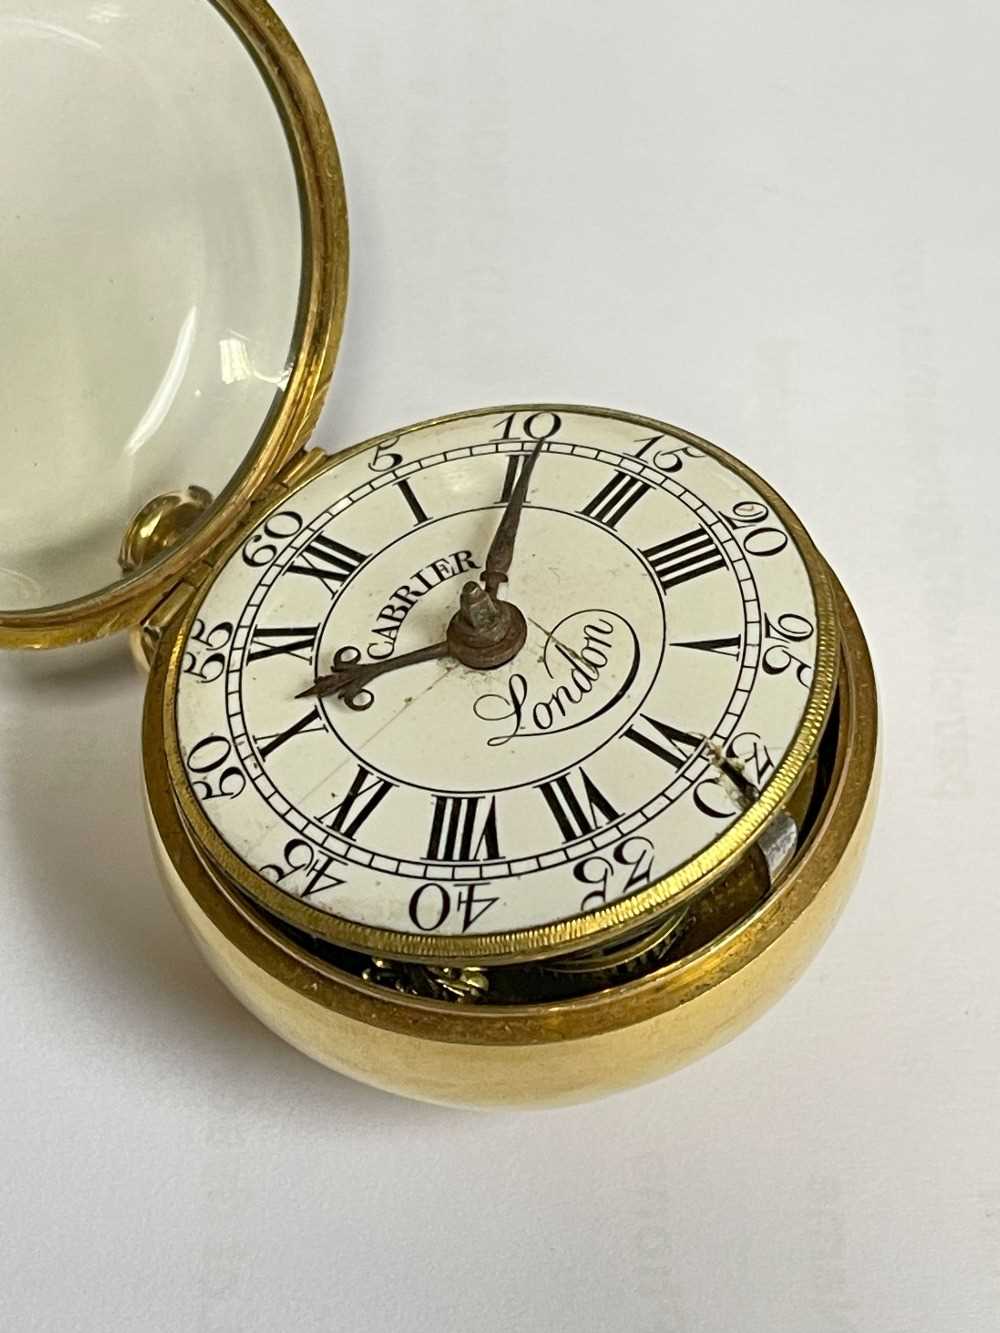 MID-18TH C. GOLD PAIR CASED POCKET WATCH, Charles Cabrier, London 1750, with white enamel dial, - Image 8 of 12